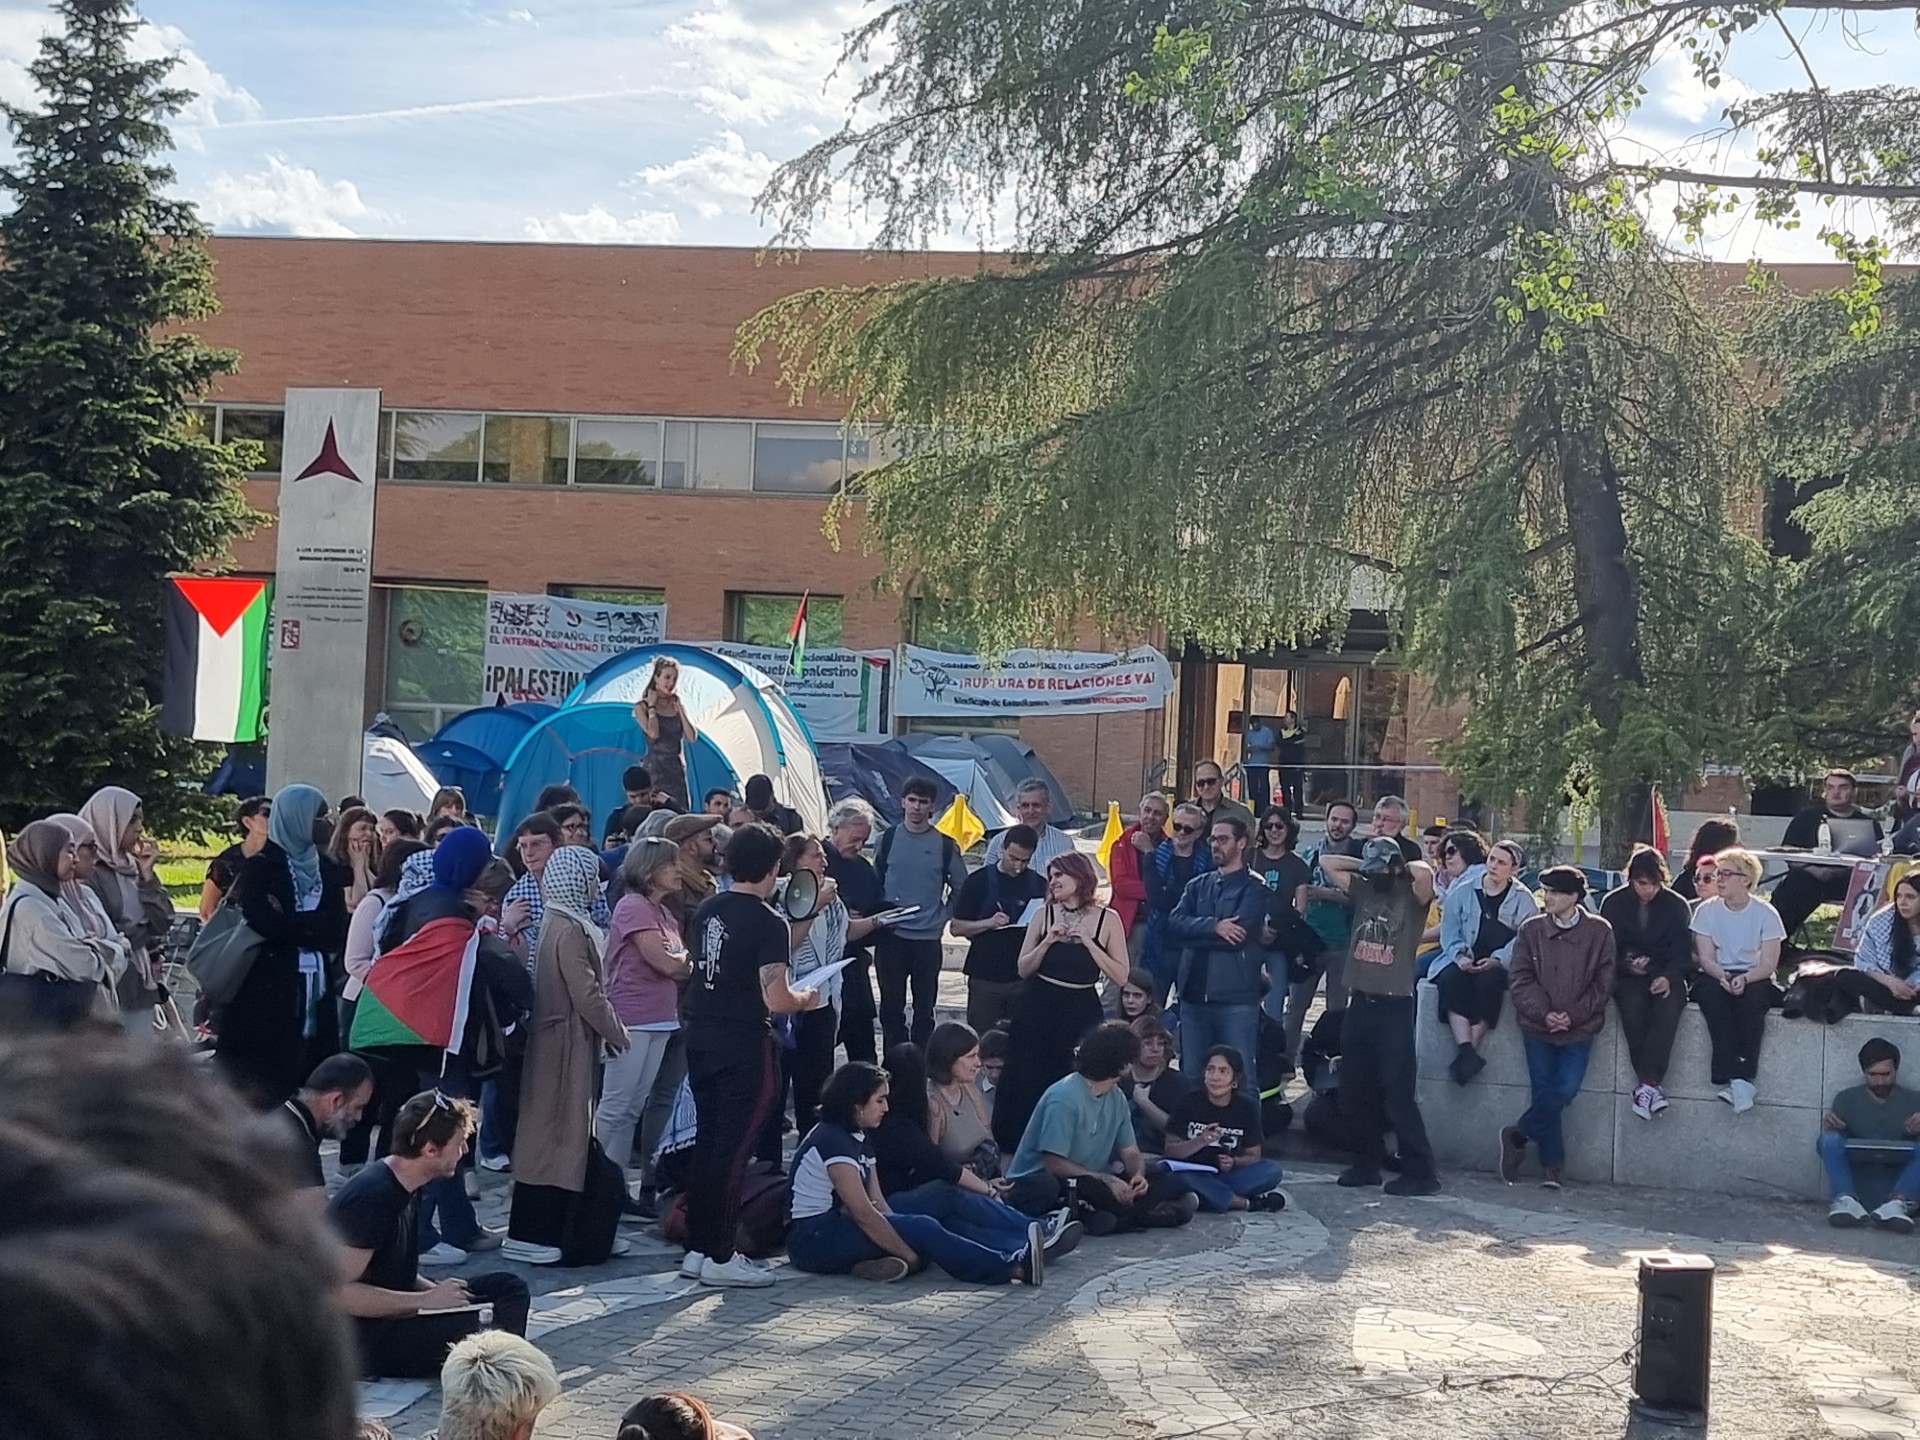 Complutense University students showing their support for Palestine